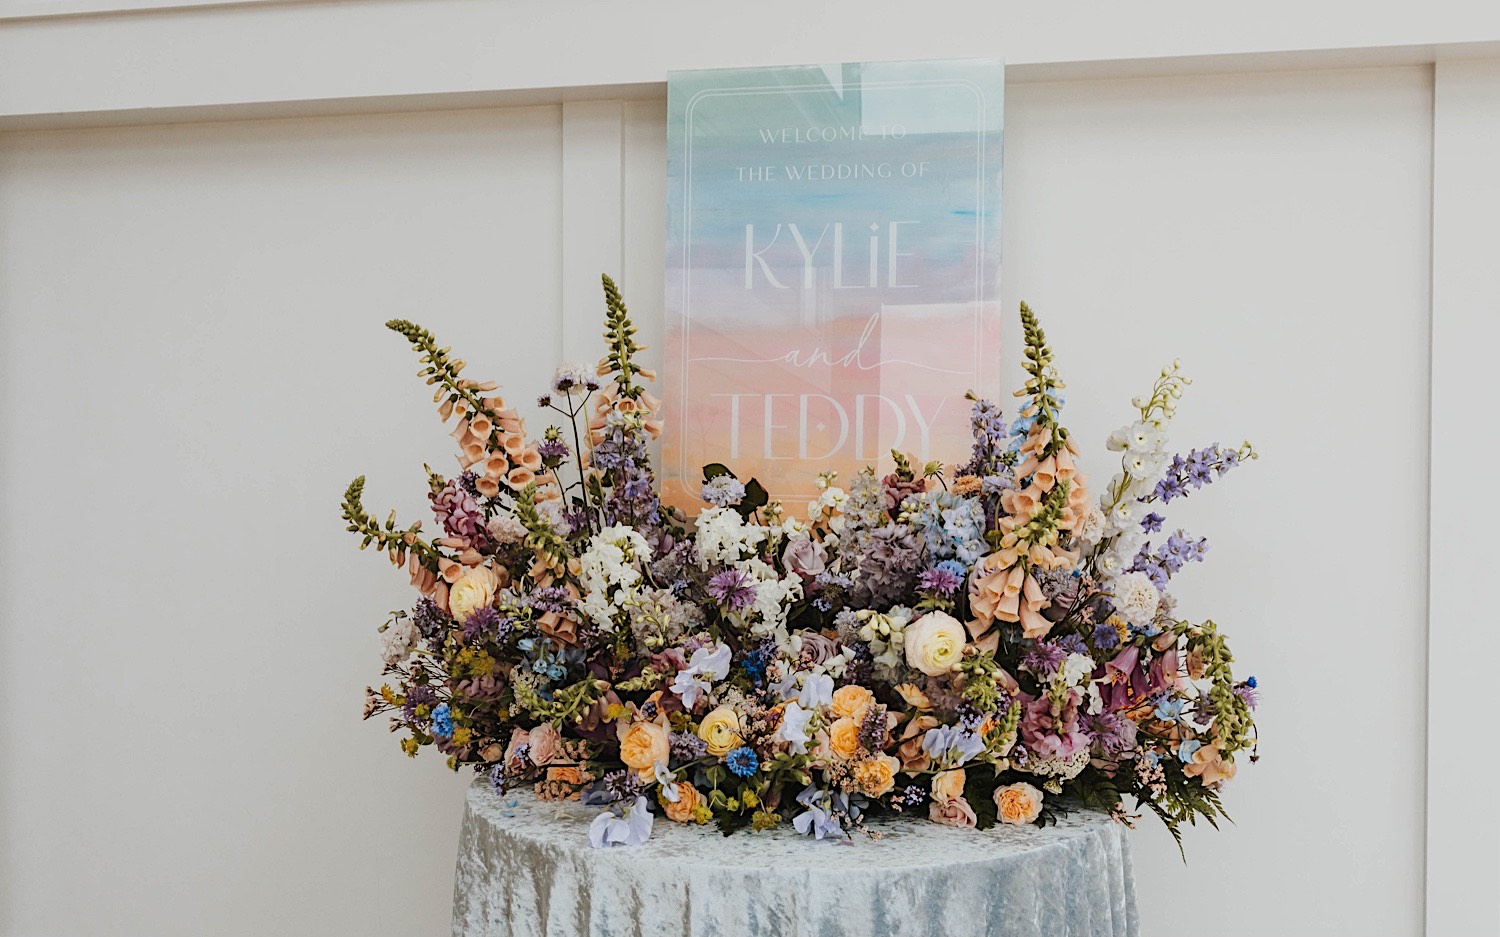 A custom sign for a wedding at The Aisling sits on a table surrounded by flowers